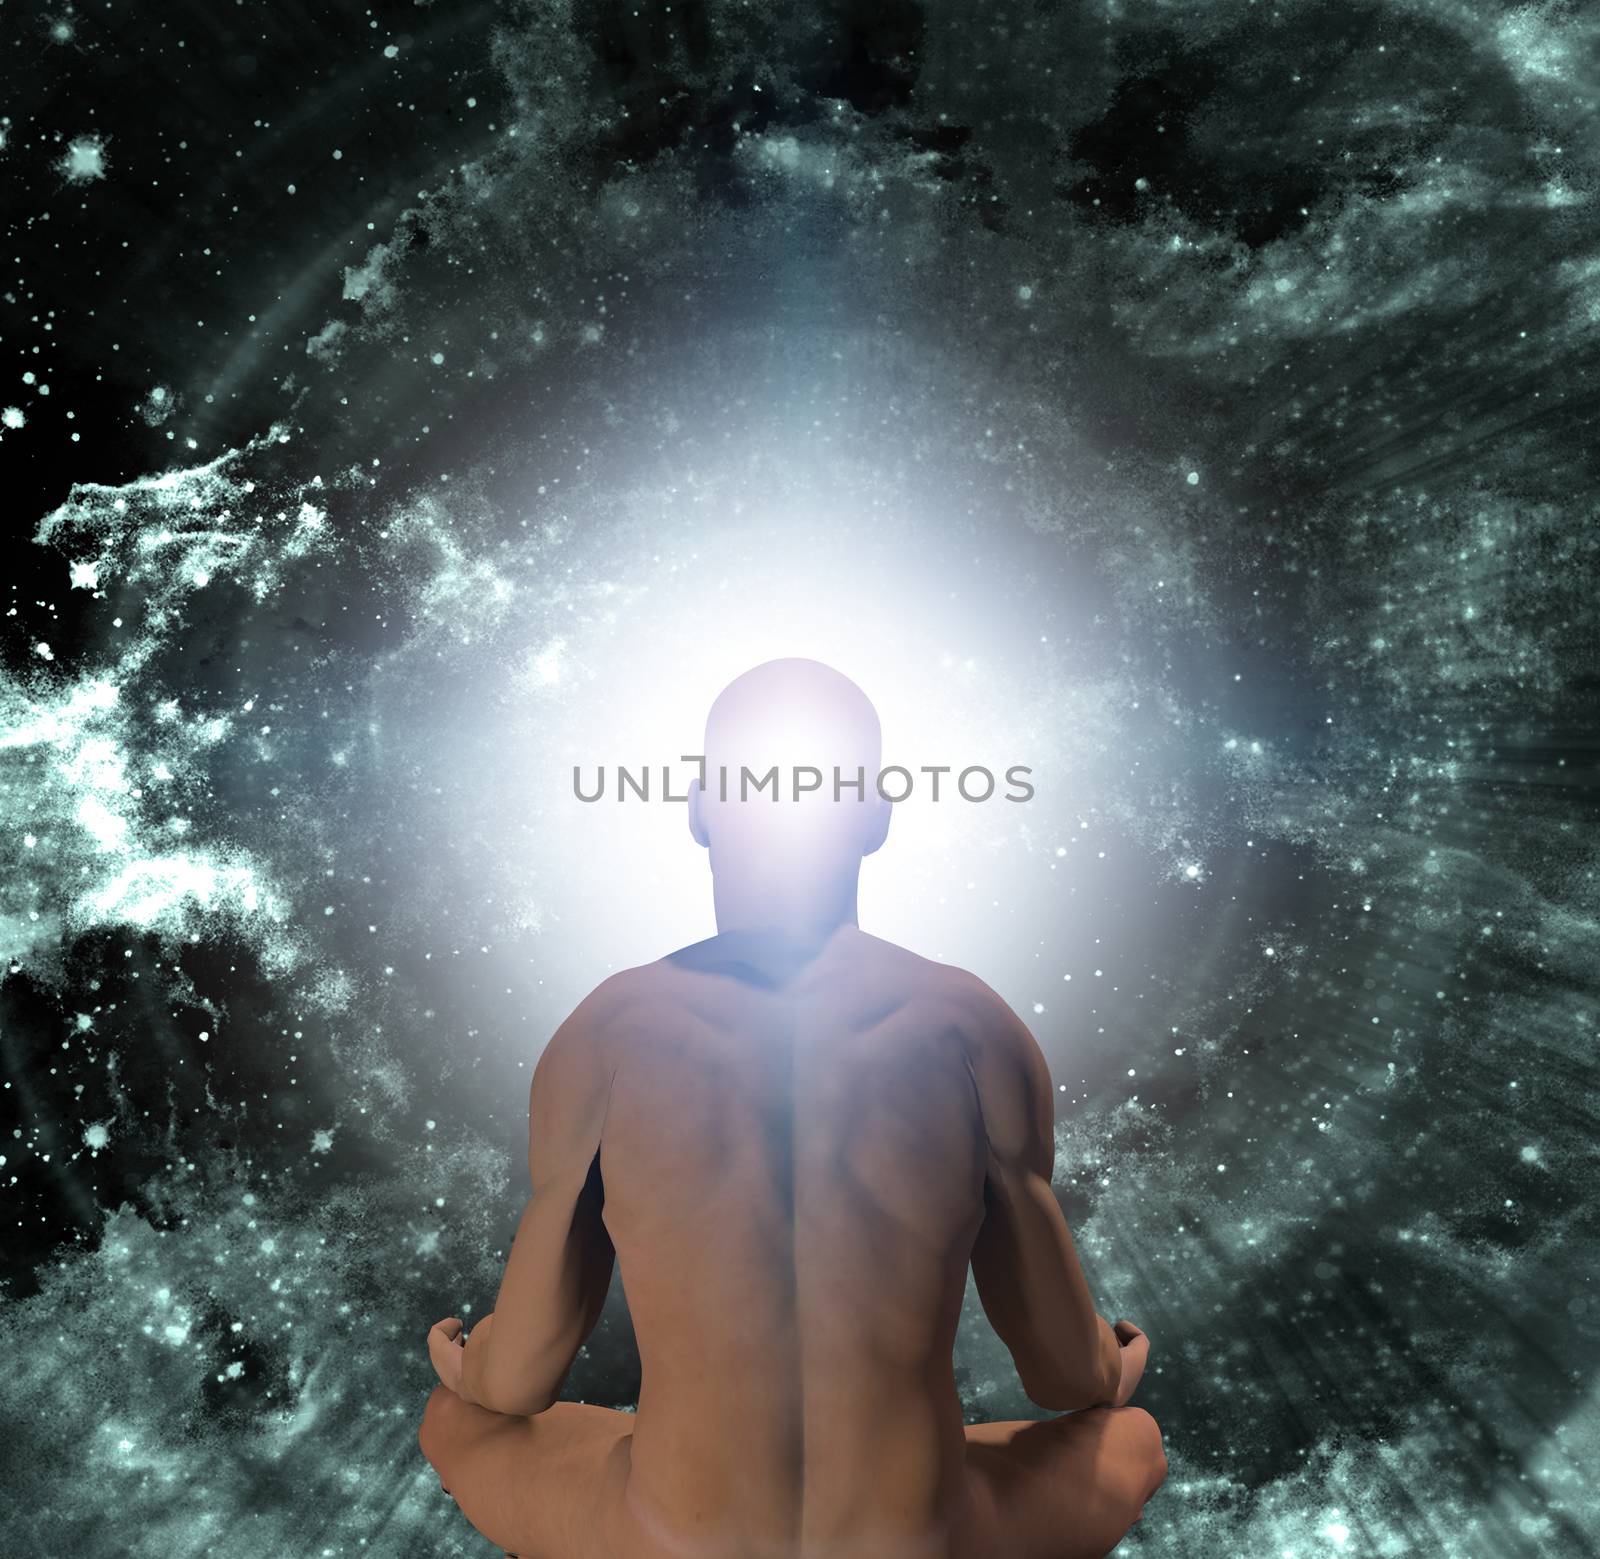 Man in lotus position meditates before endless spaces.